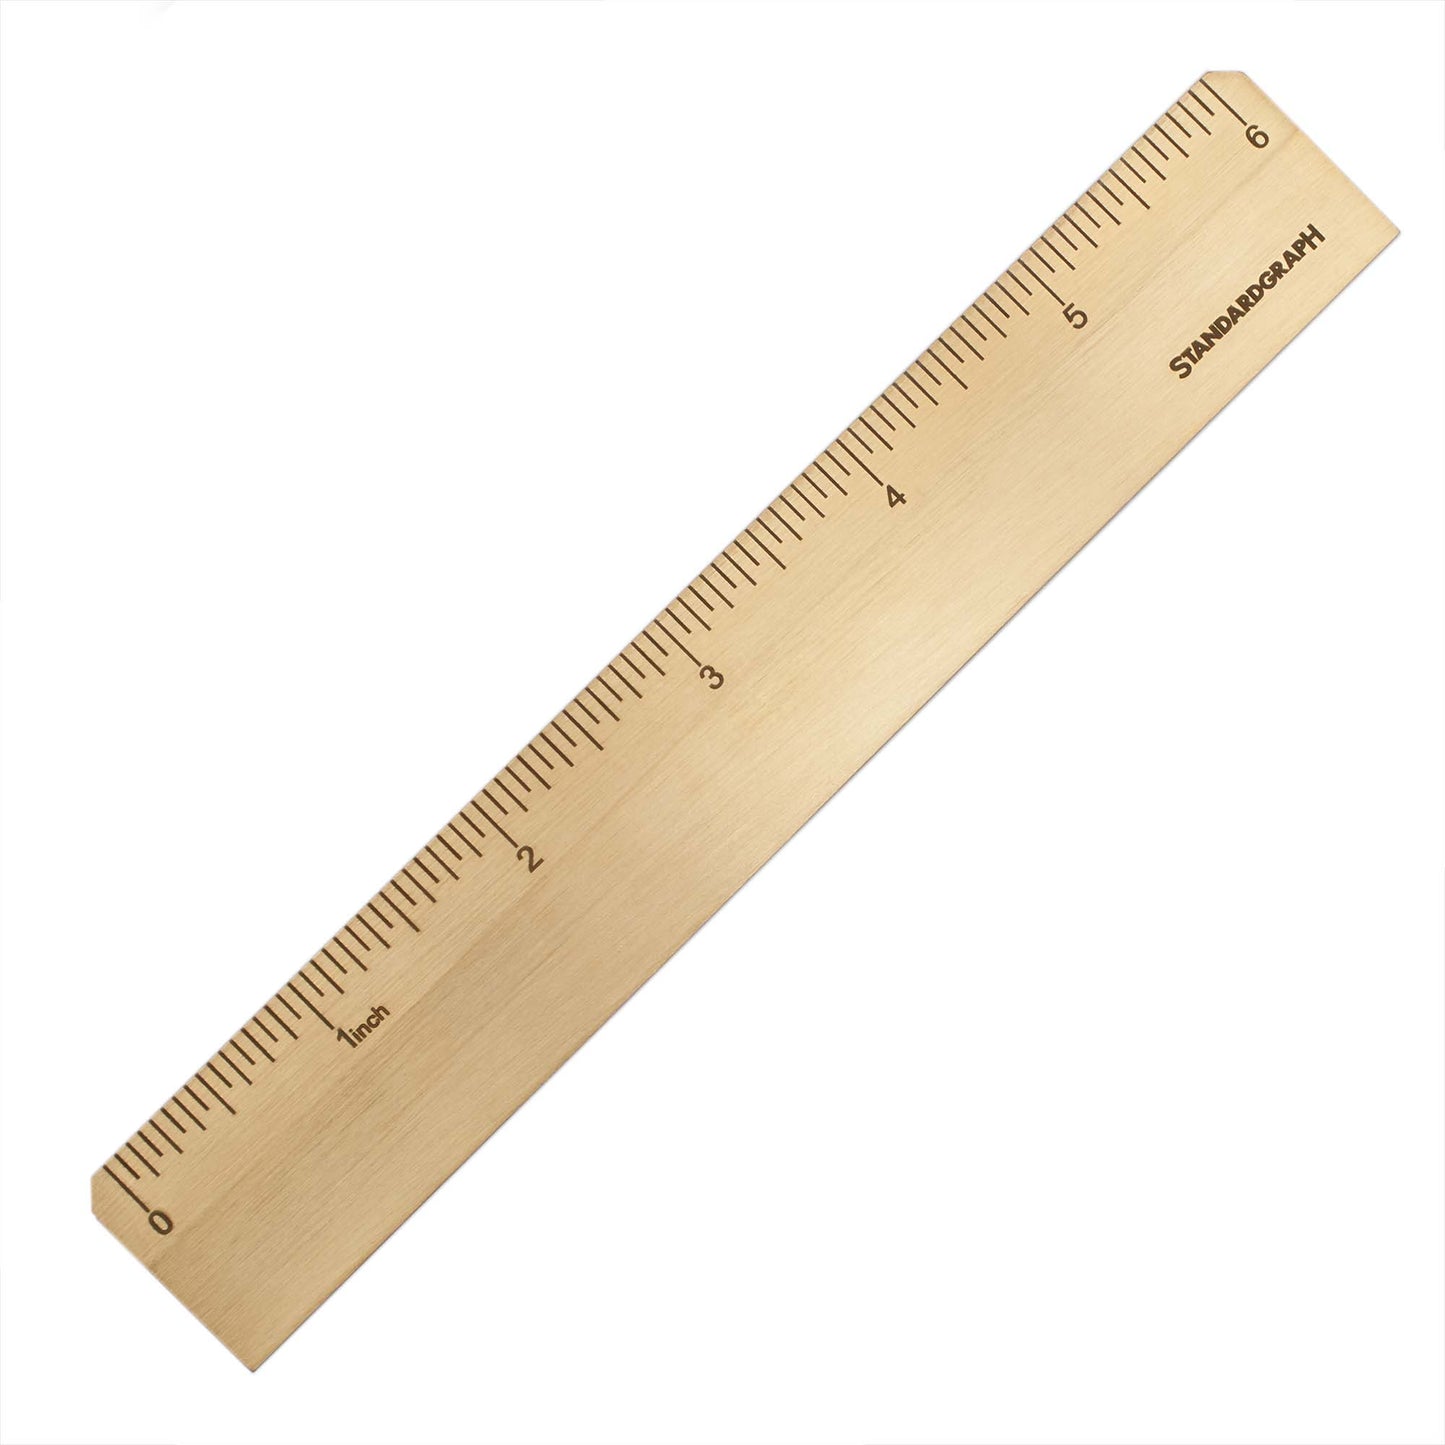 Dux Standardgraph Brass Ruler Inches Made in Germany